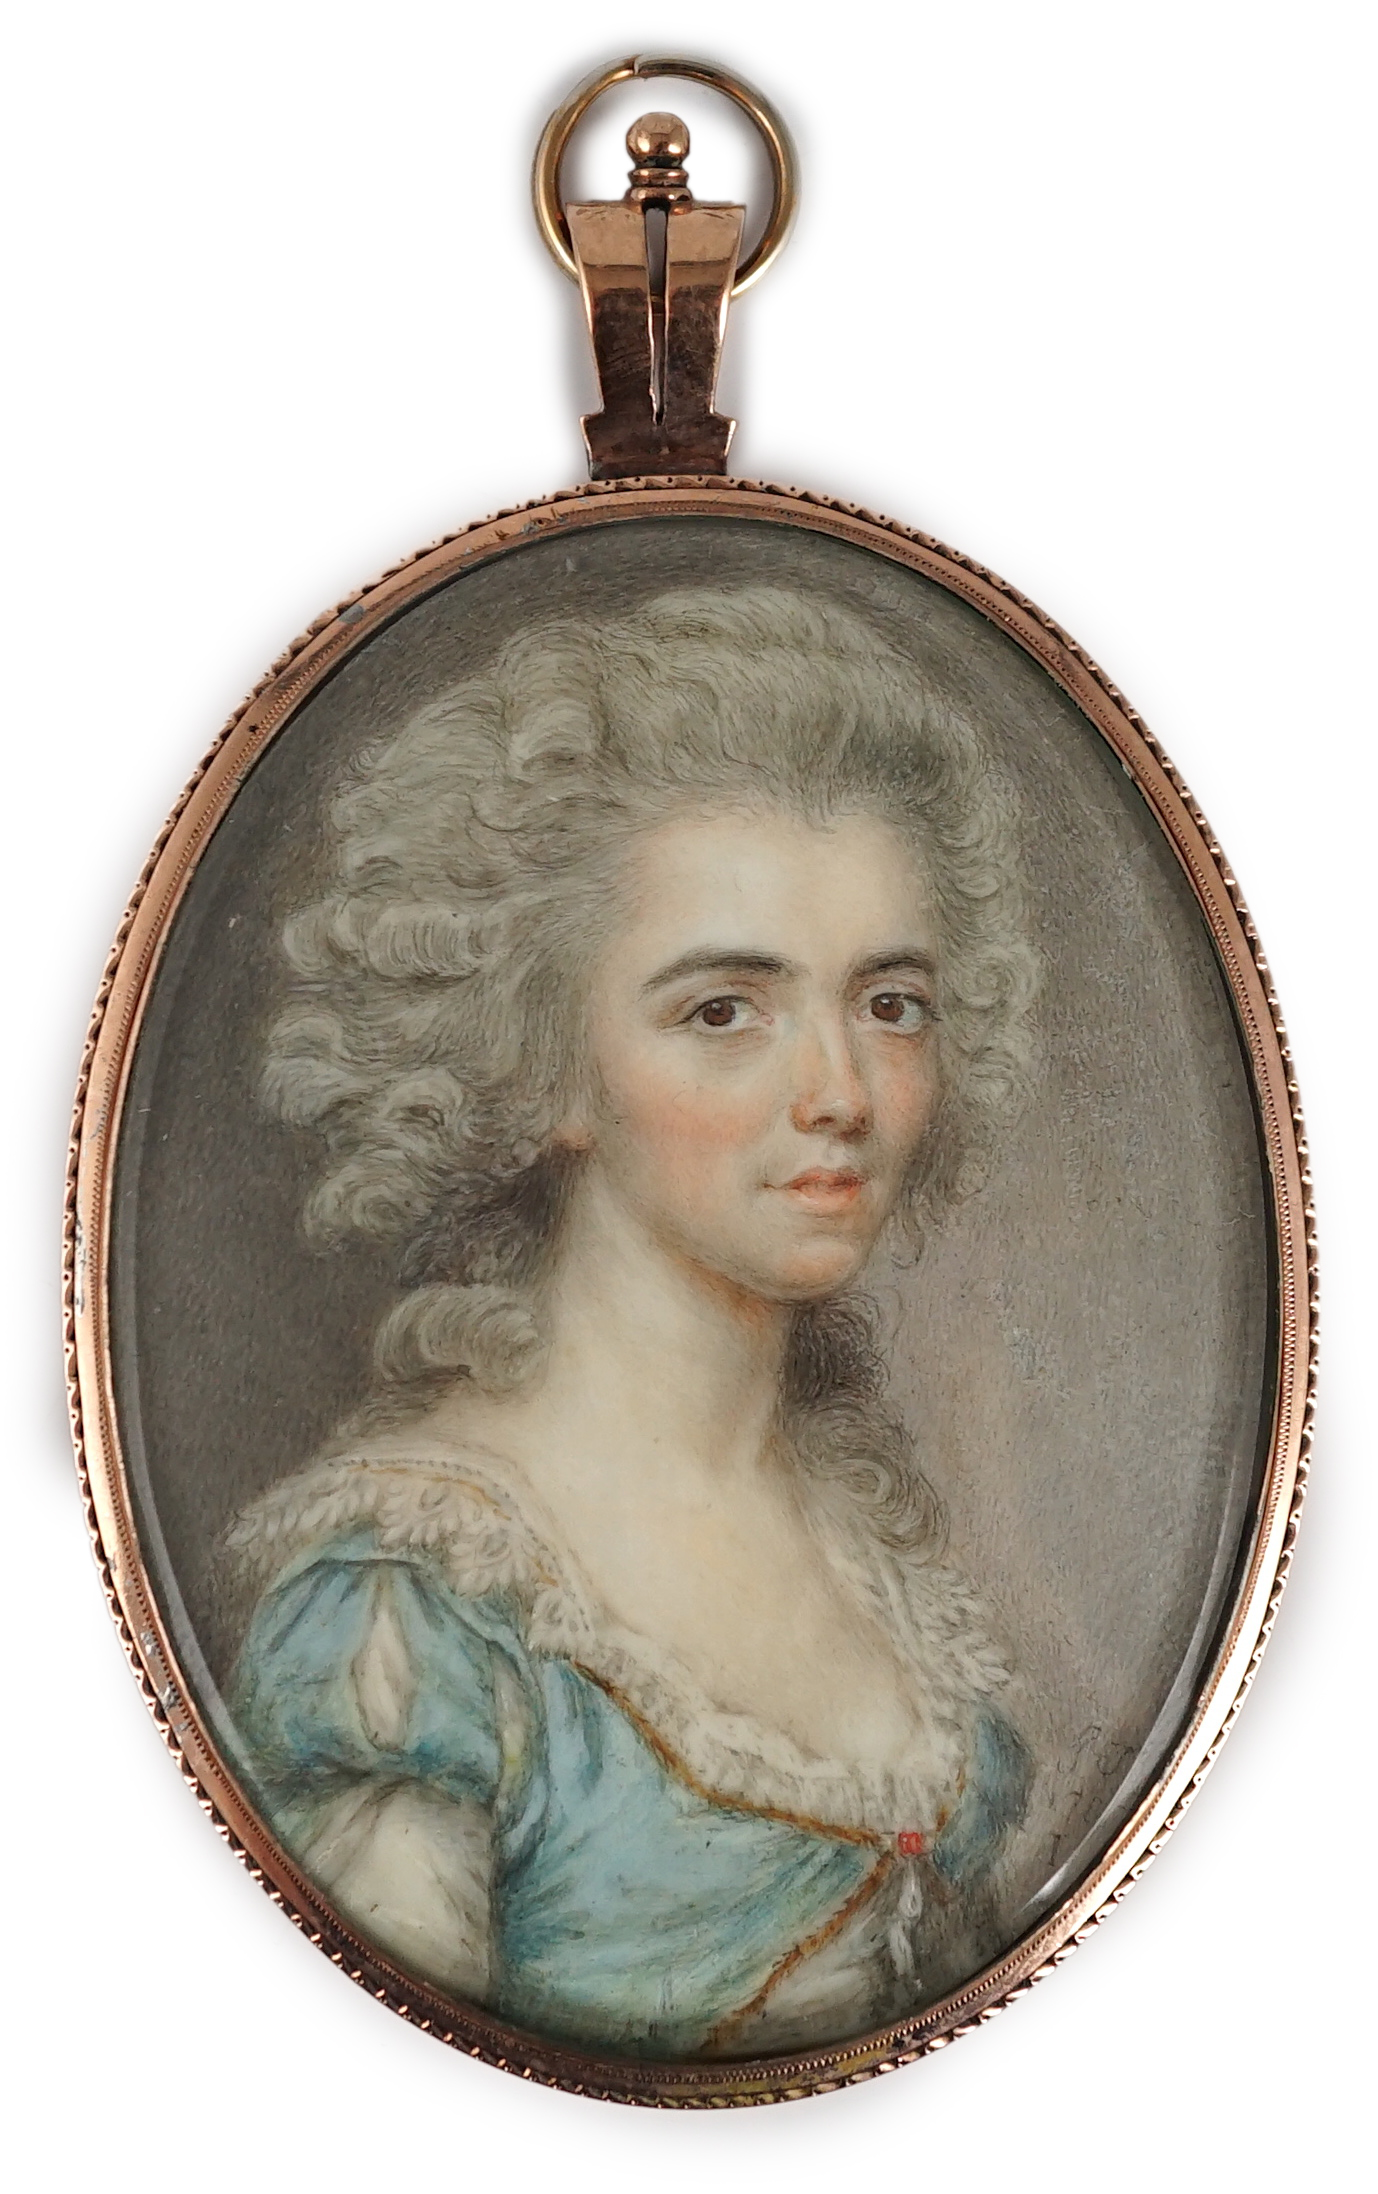 John Smart (British, 1742-1811), Portrait miniature of a lady, oil on ivory, 5.6 x 4.1cm. CITES Submission reference 7L721KC3